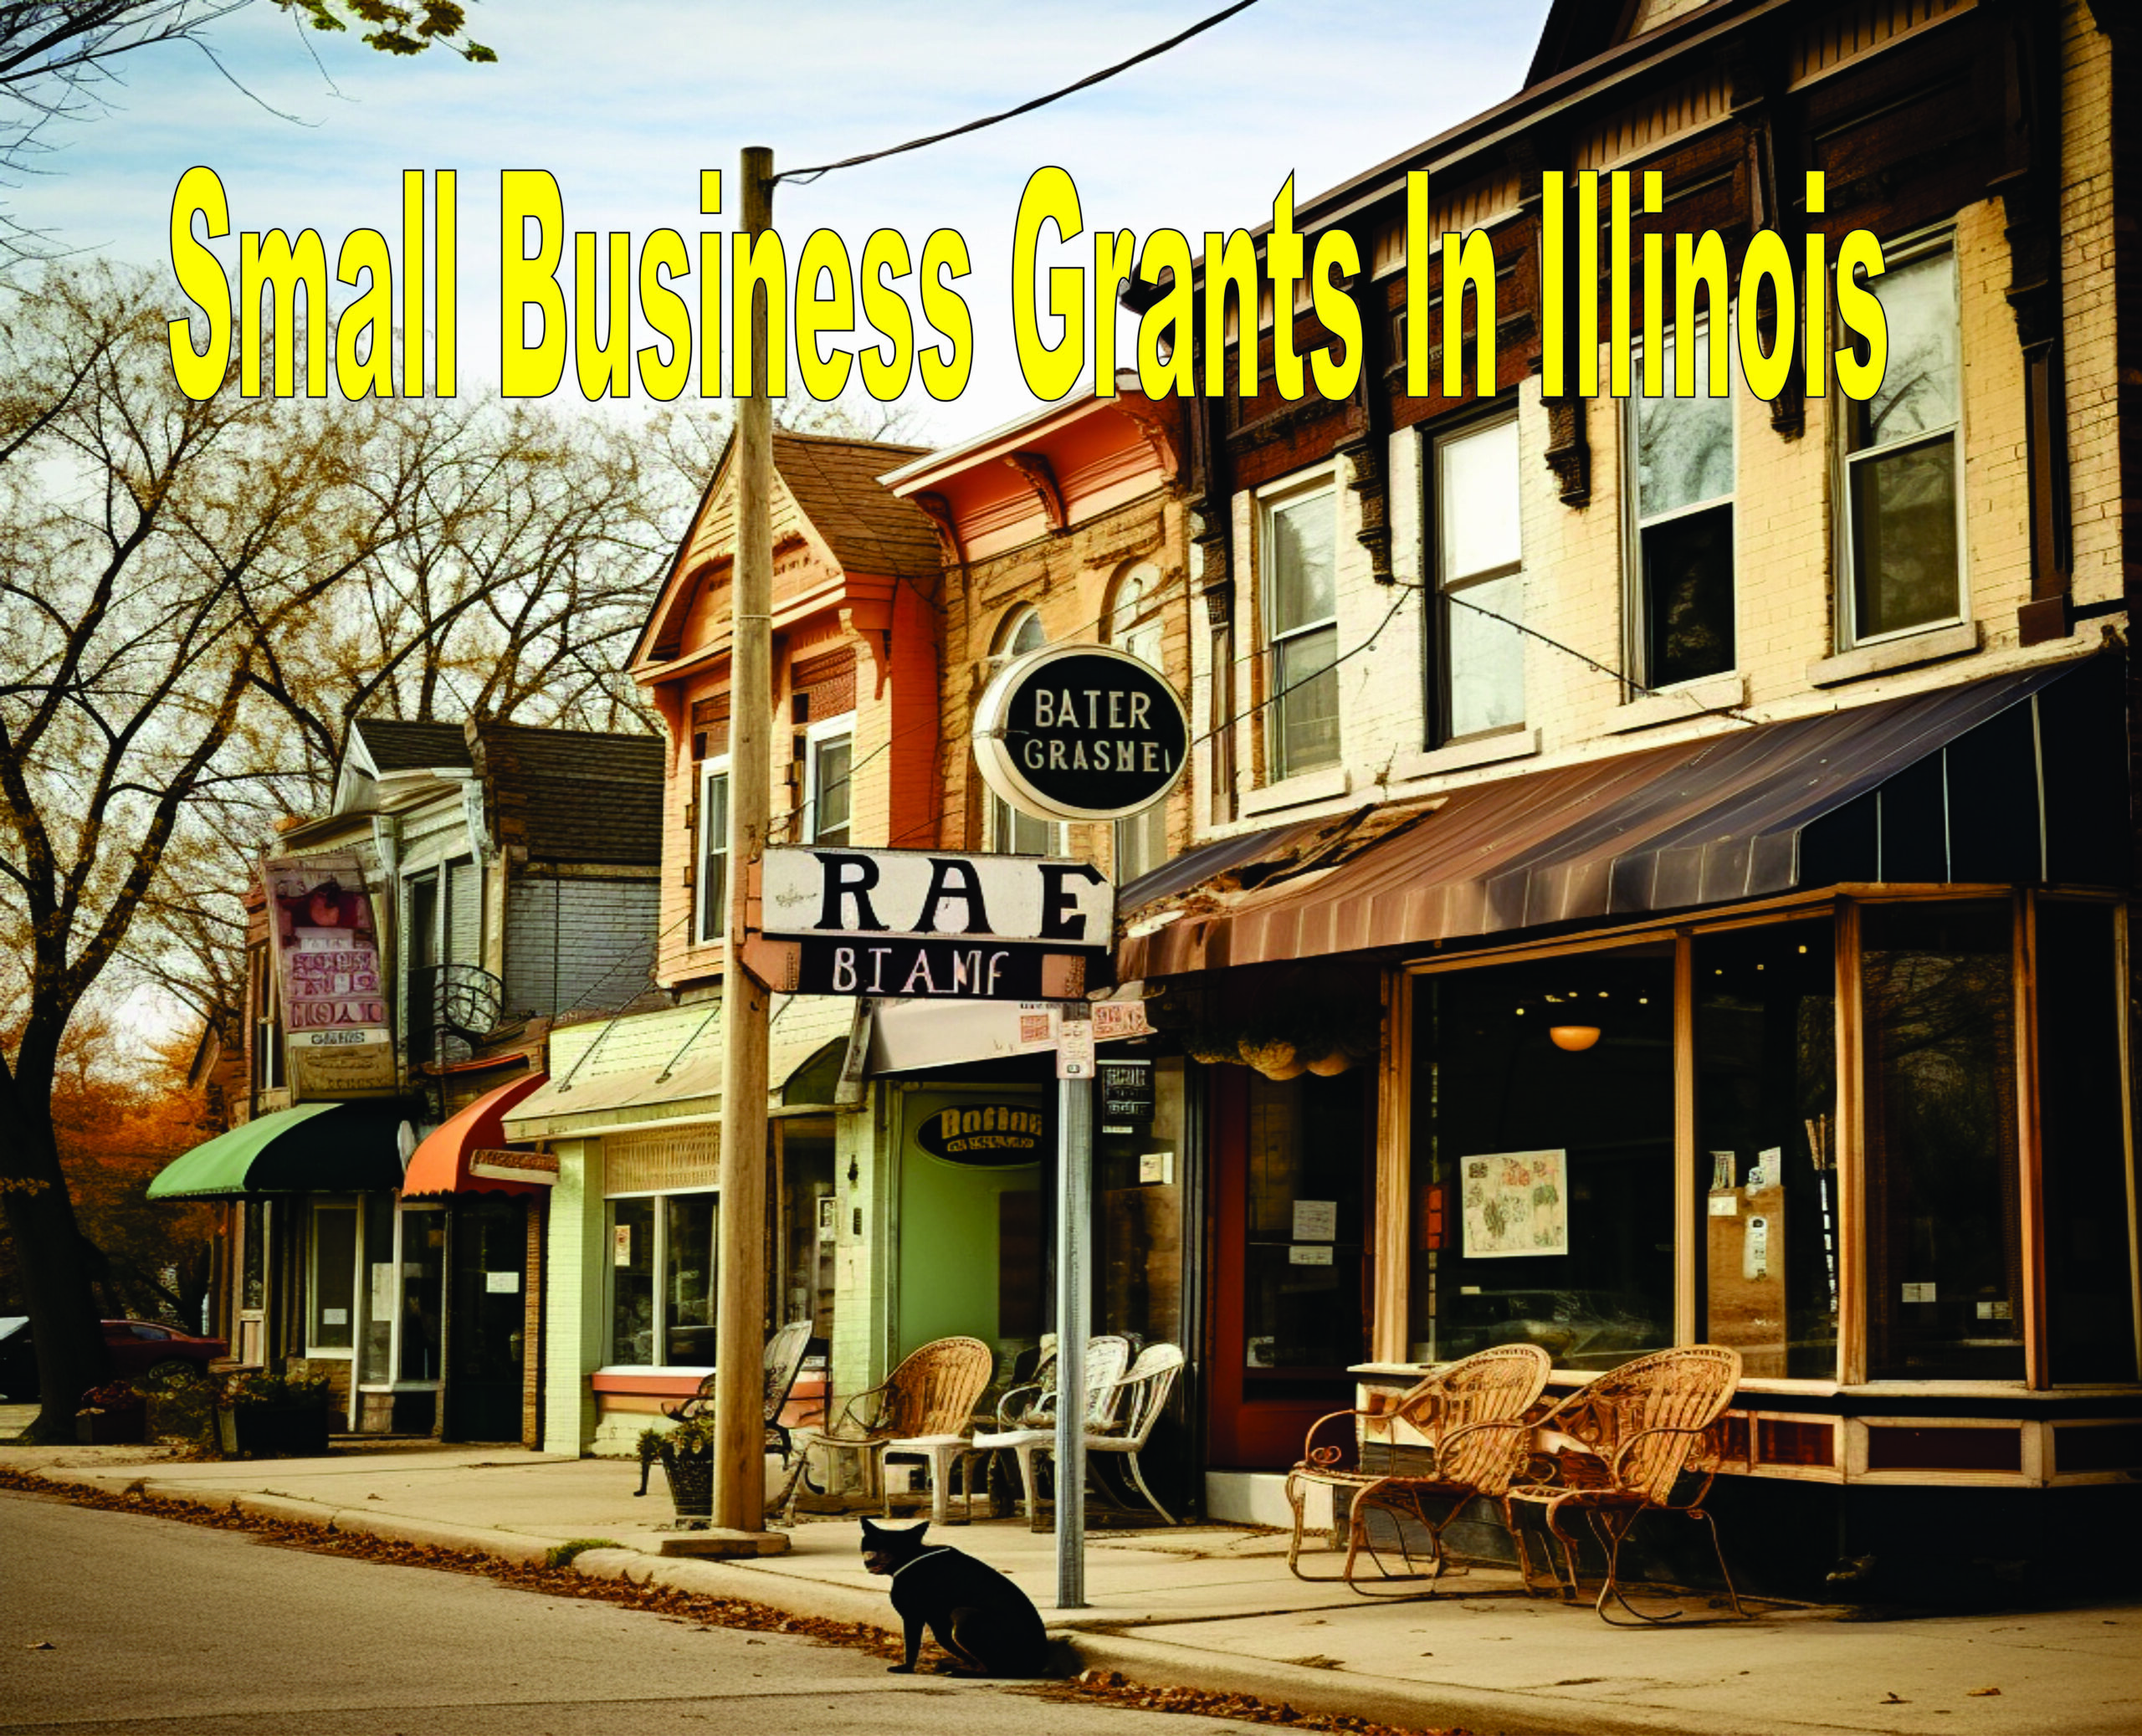 Small Business Grants In Illinois